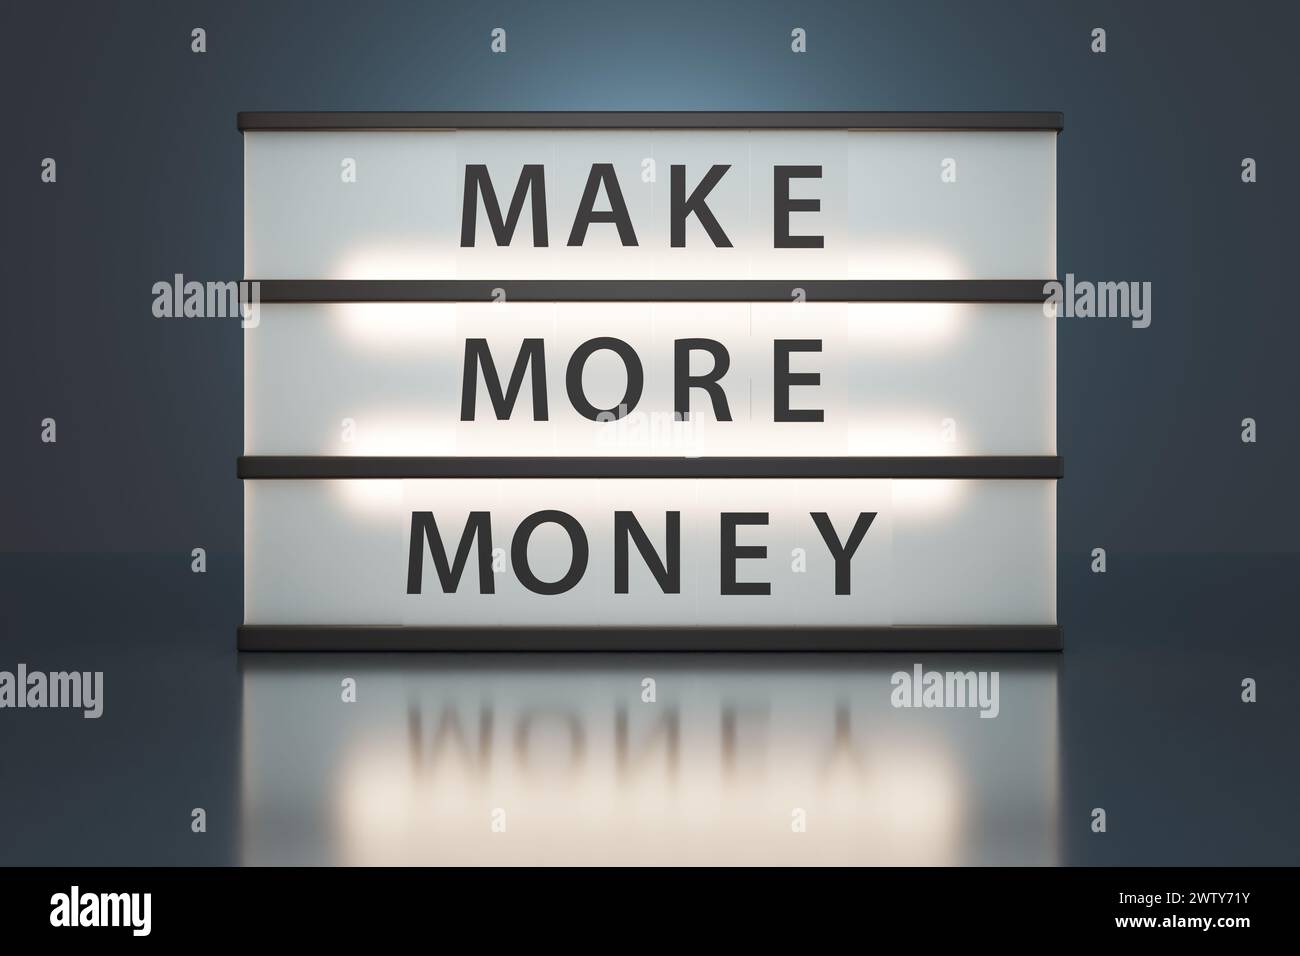 Miniature classic cinema light box showing the words MAKE MORE MONEY in dark background. Concept of ambition of earning money and income streams Stock Photo